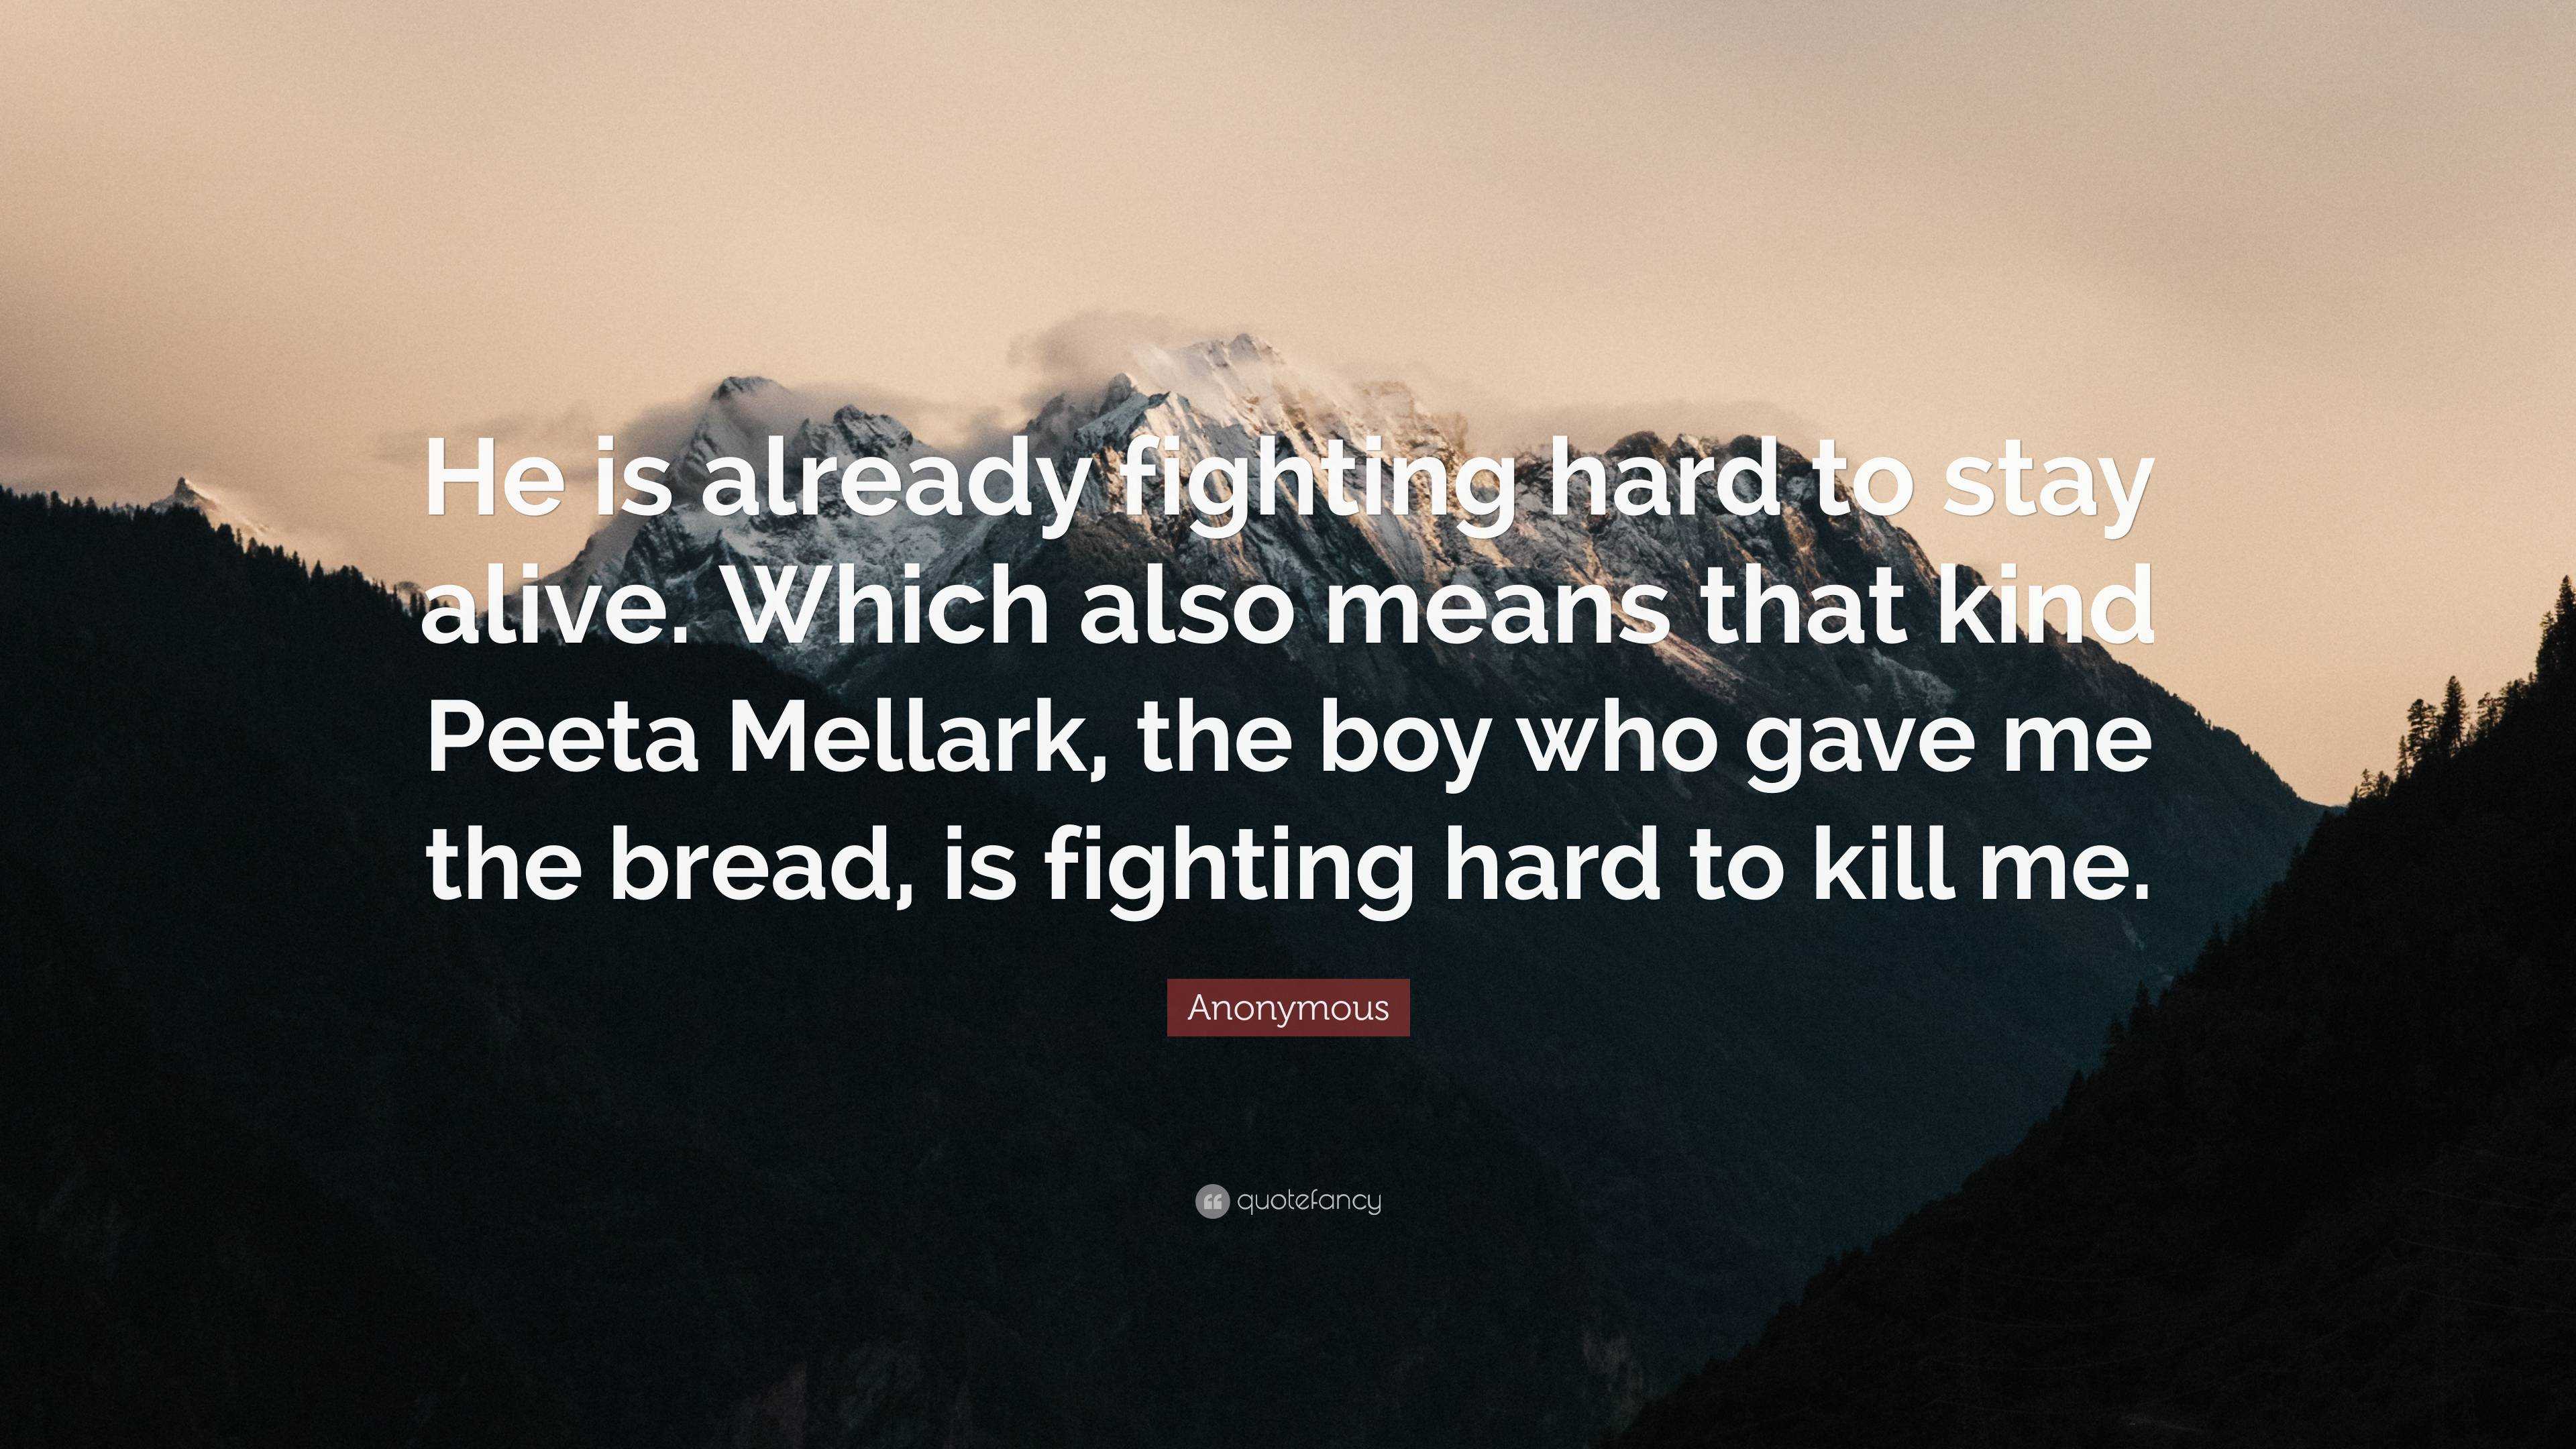 Anonymous Quote: “He is already fighting hard to stay alive. Which also  means that kind Peeta Mellark, the boy who gave me the bread, is f...”